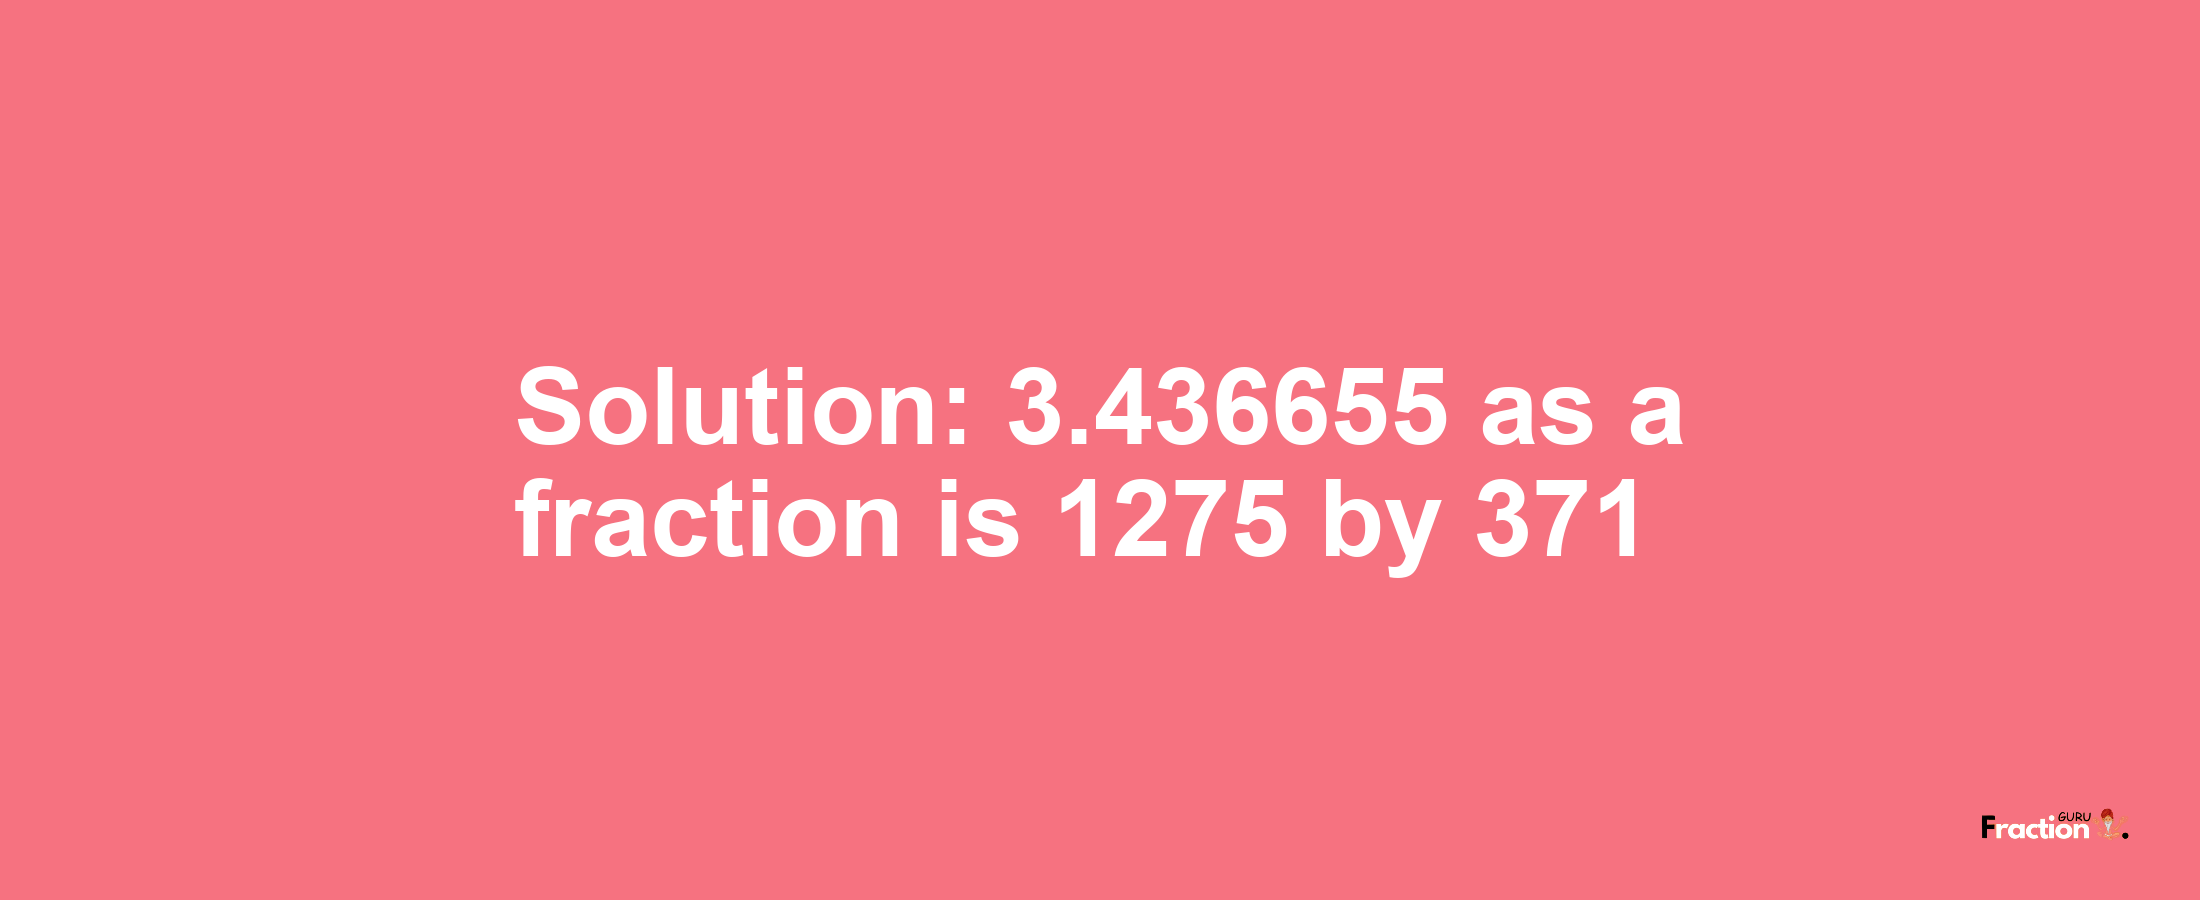 Solution:3.436655 as a fraction is 1275/371